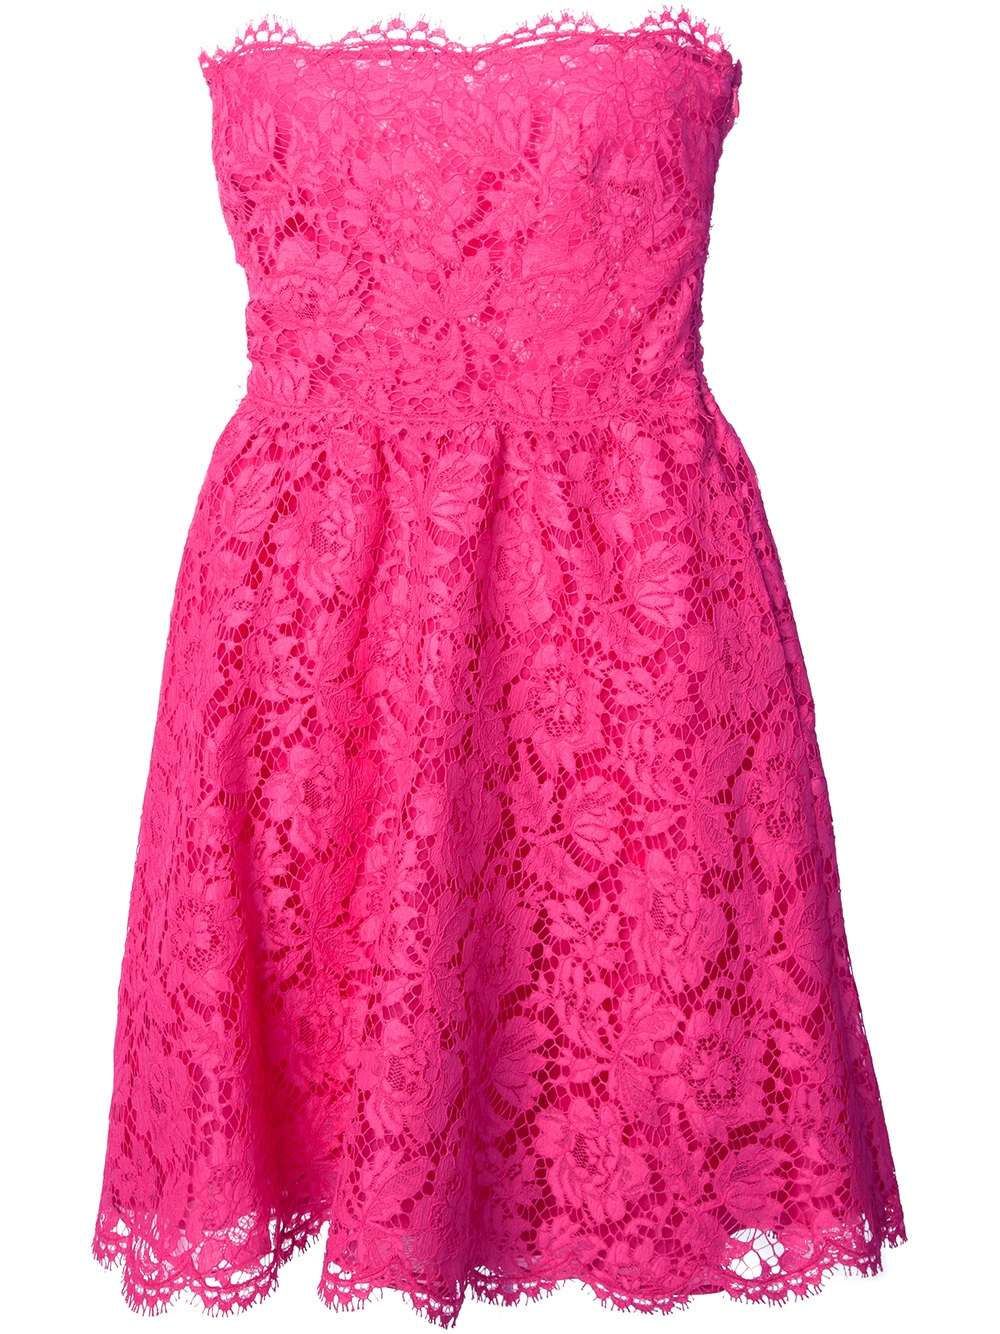 Lyst - Valentino Floral Lace Strapless Dress in Pink